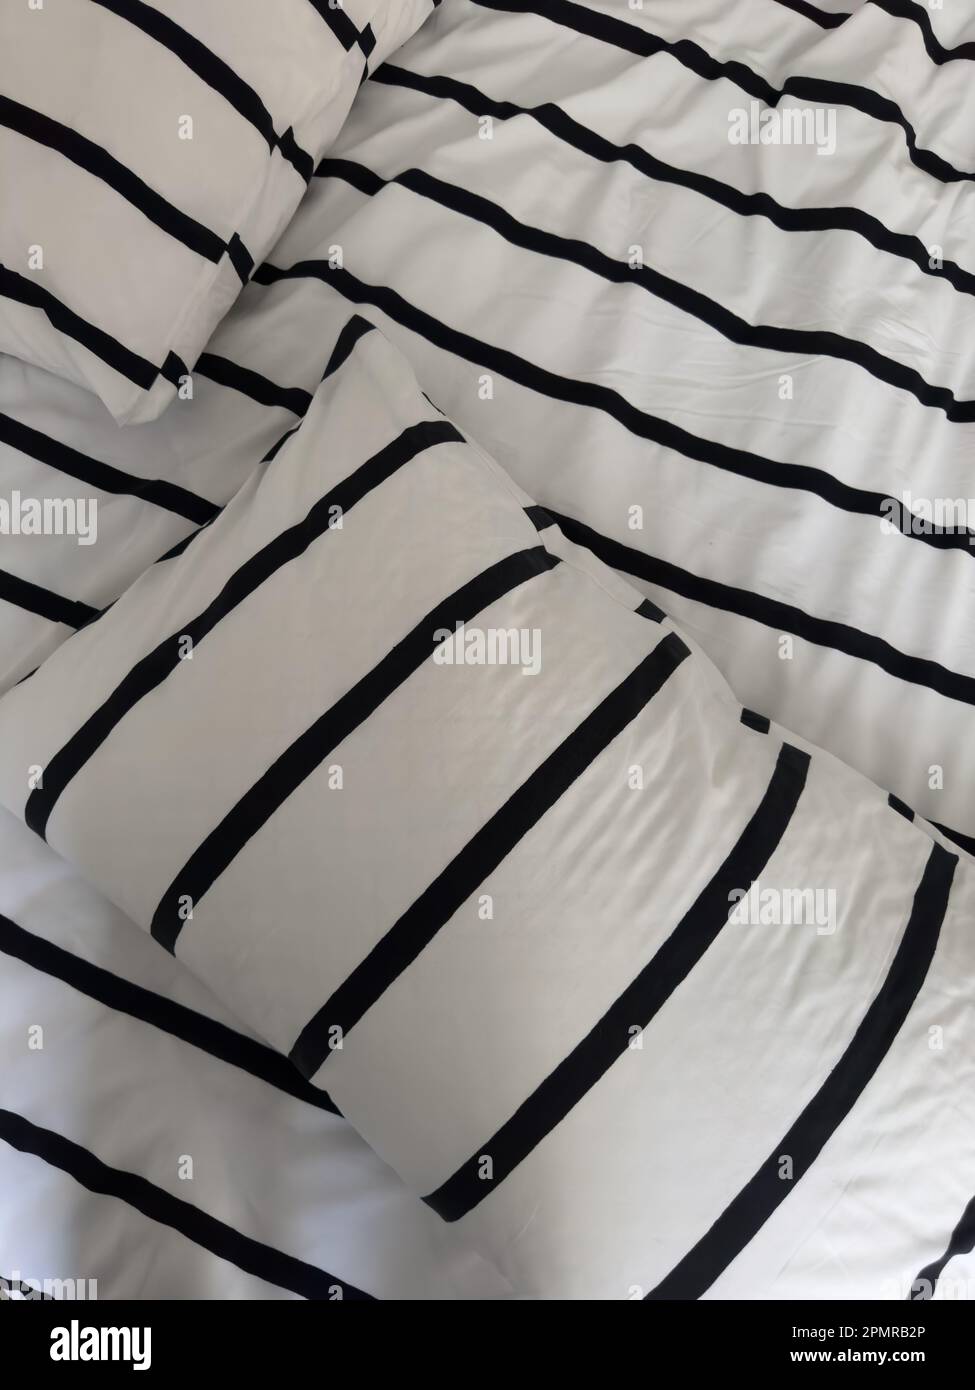 black and white stripey duvet bed covers Stock Photo